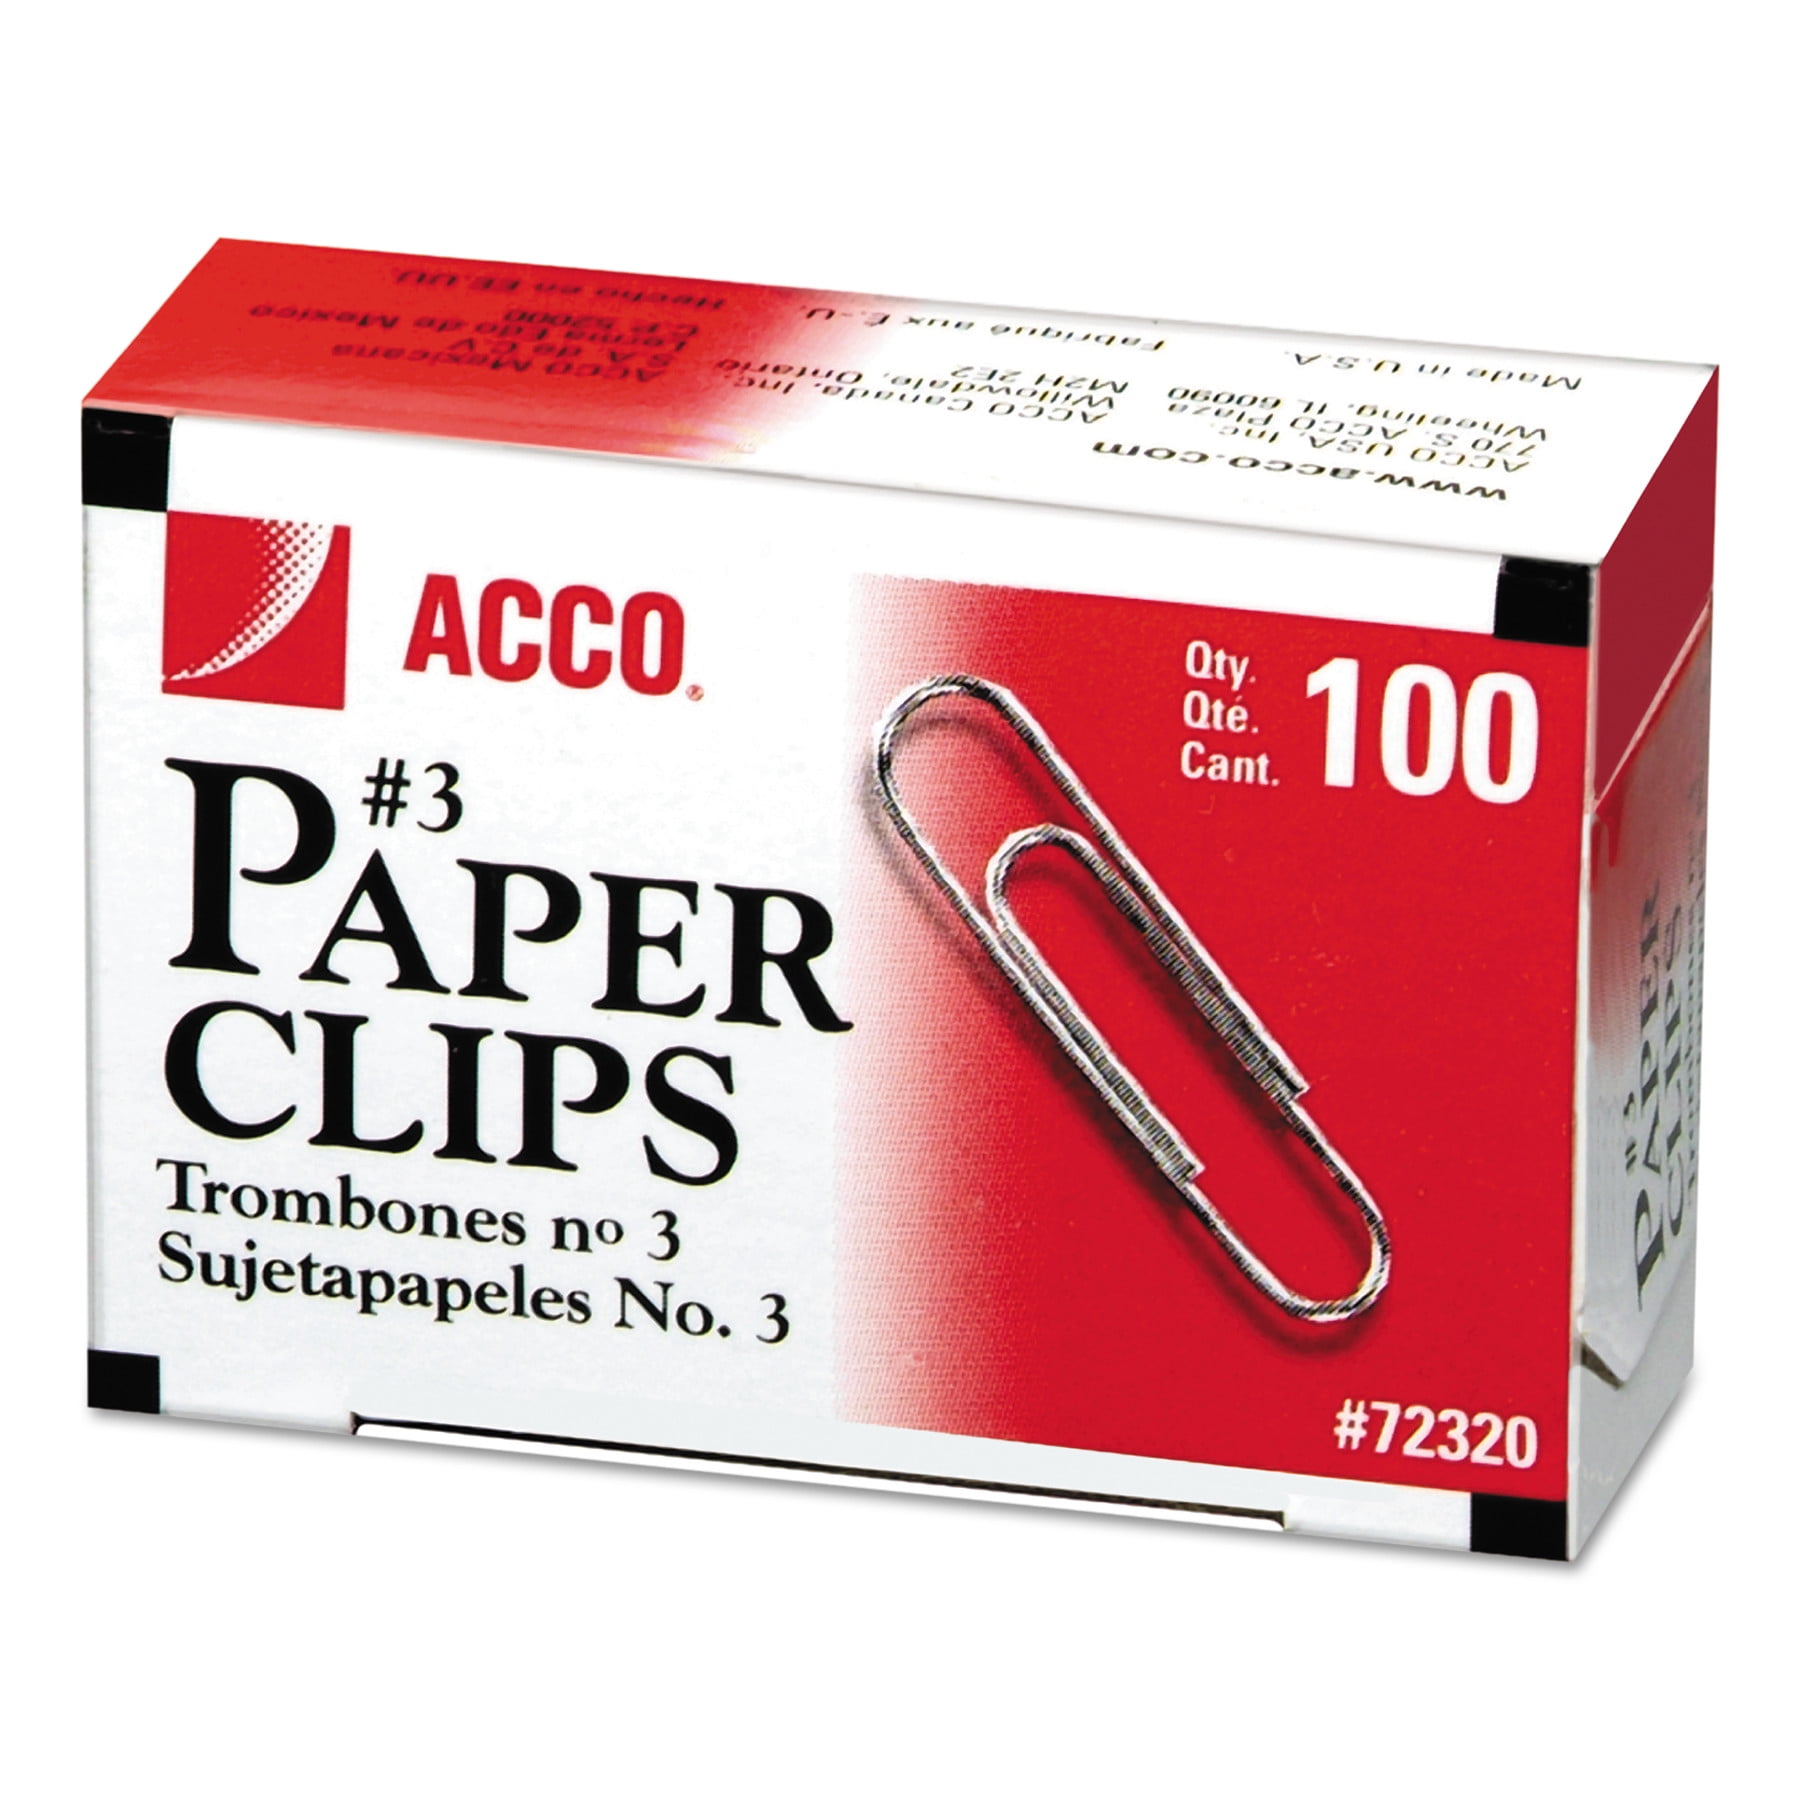 ACCO Nonskid Standard Paper Clips #1 Silver 100/Box 10 Boxes/Pack 72385 